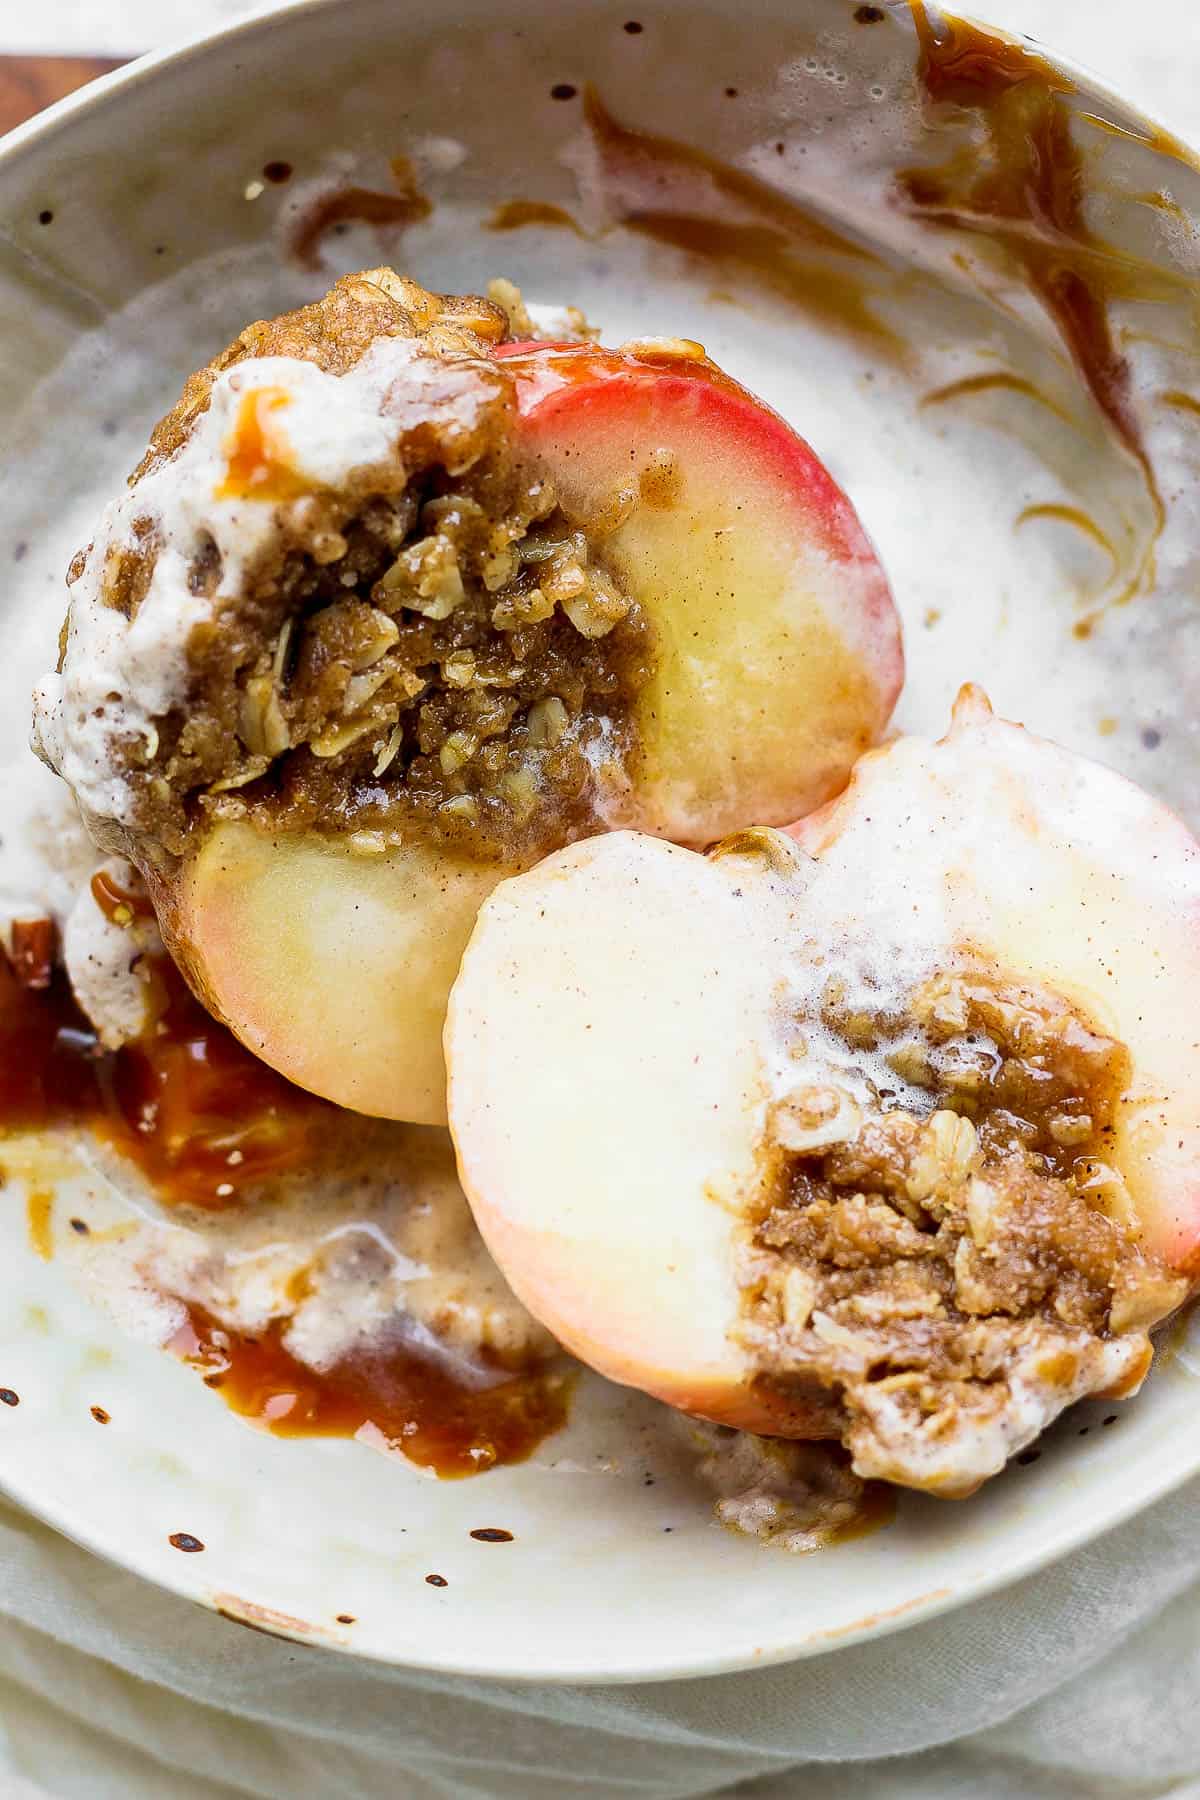 A baked apple cut in half in a bowl with all the toppings.